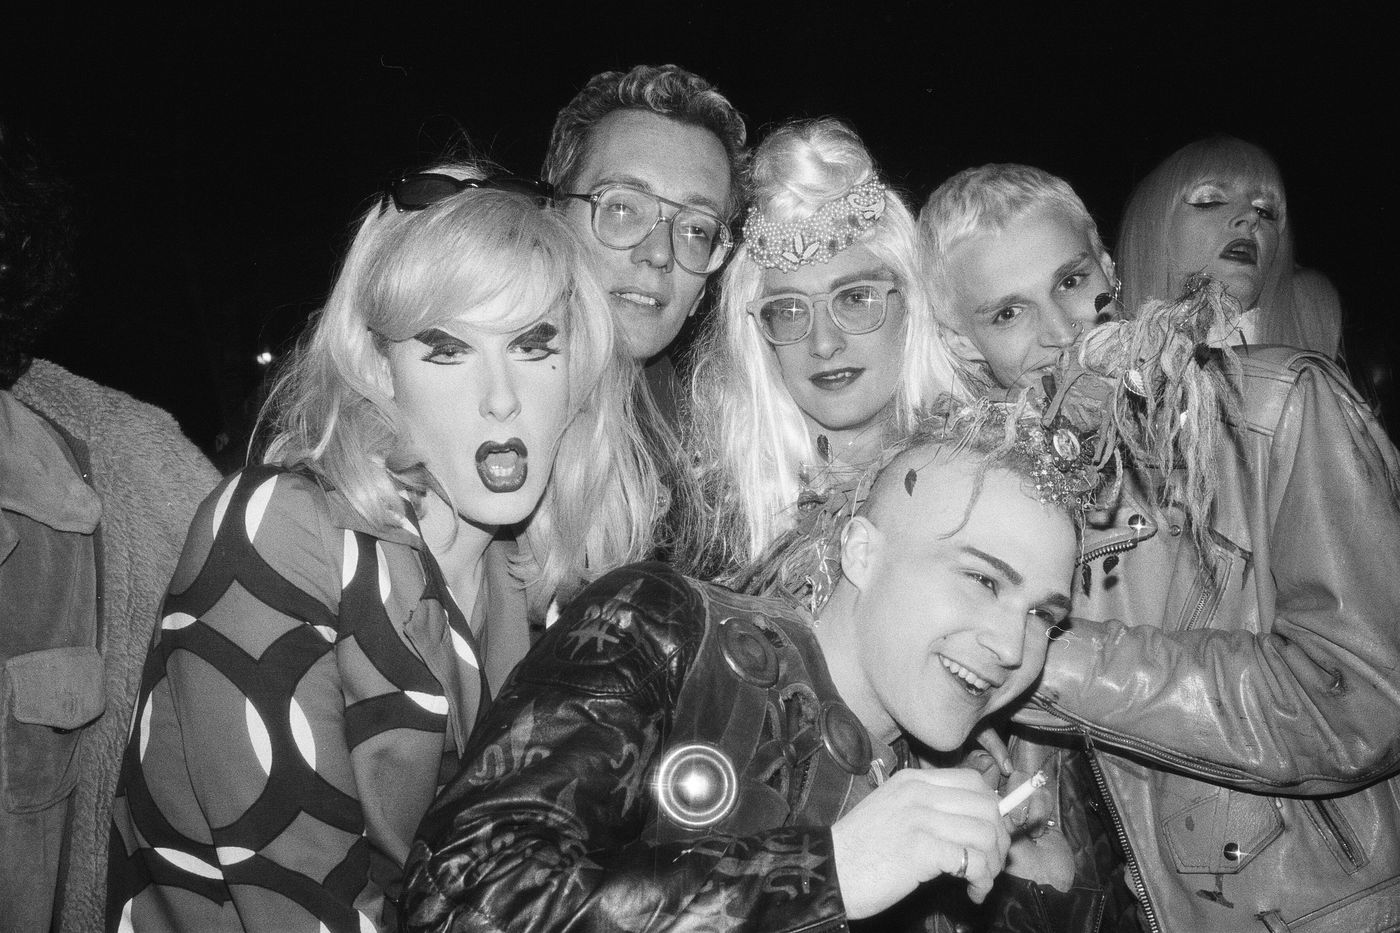 Inside the 80s club that transformed New York's punk and drag scene